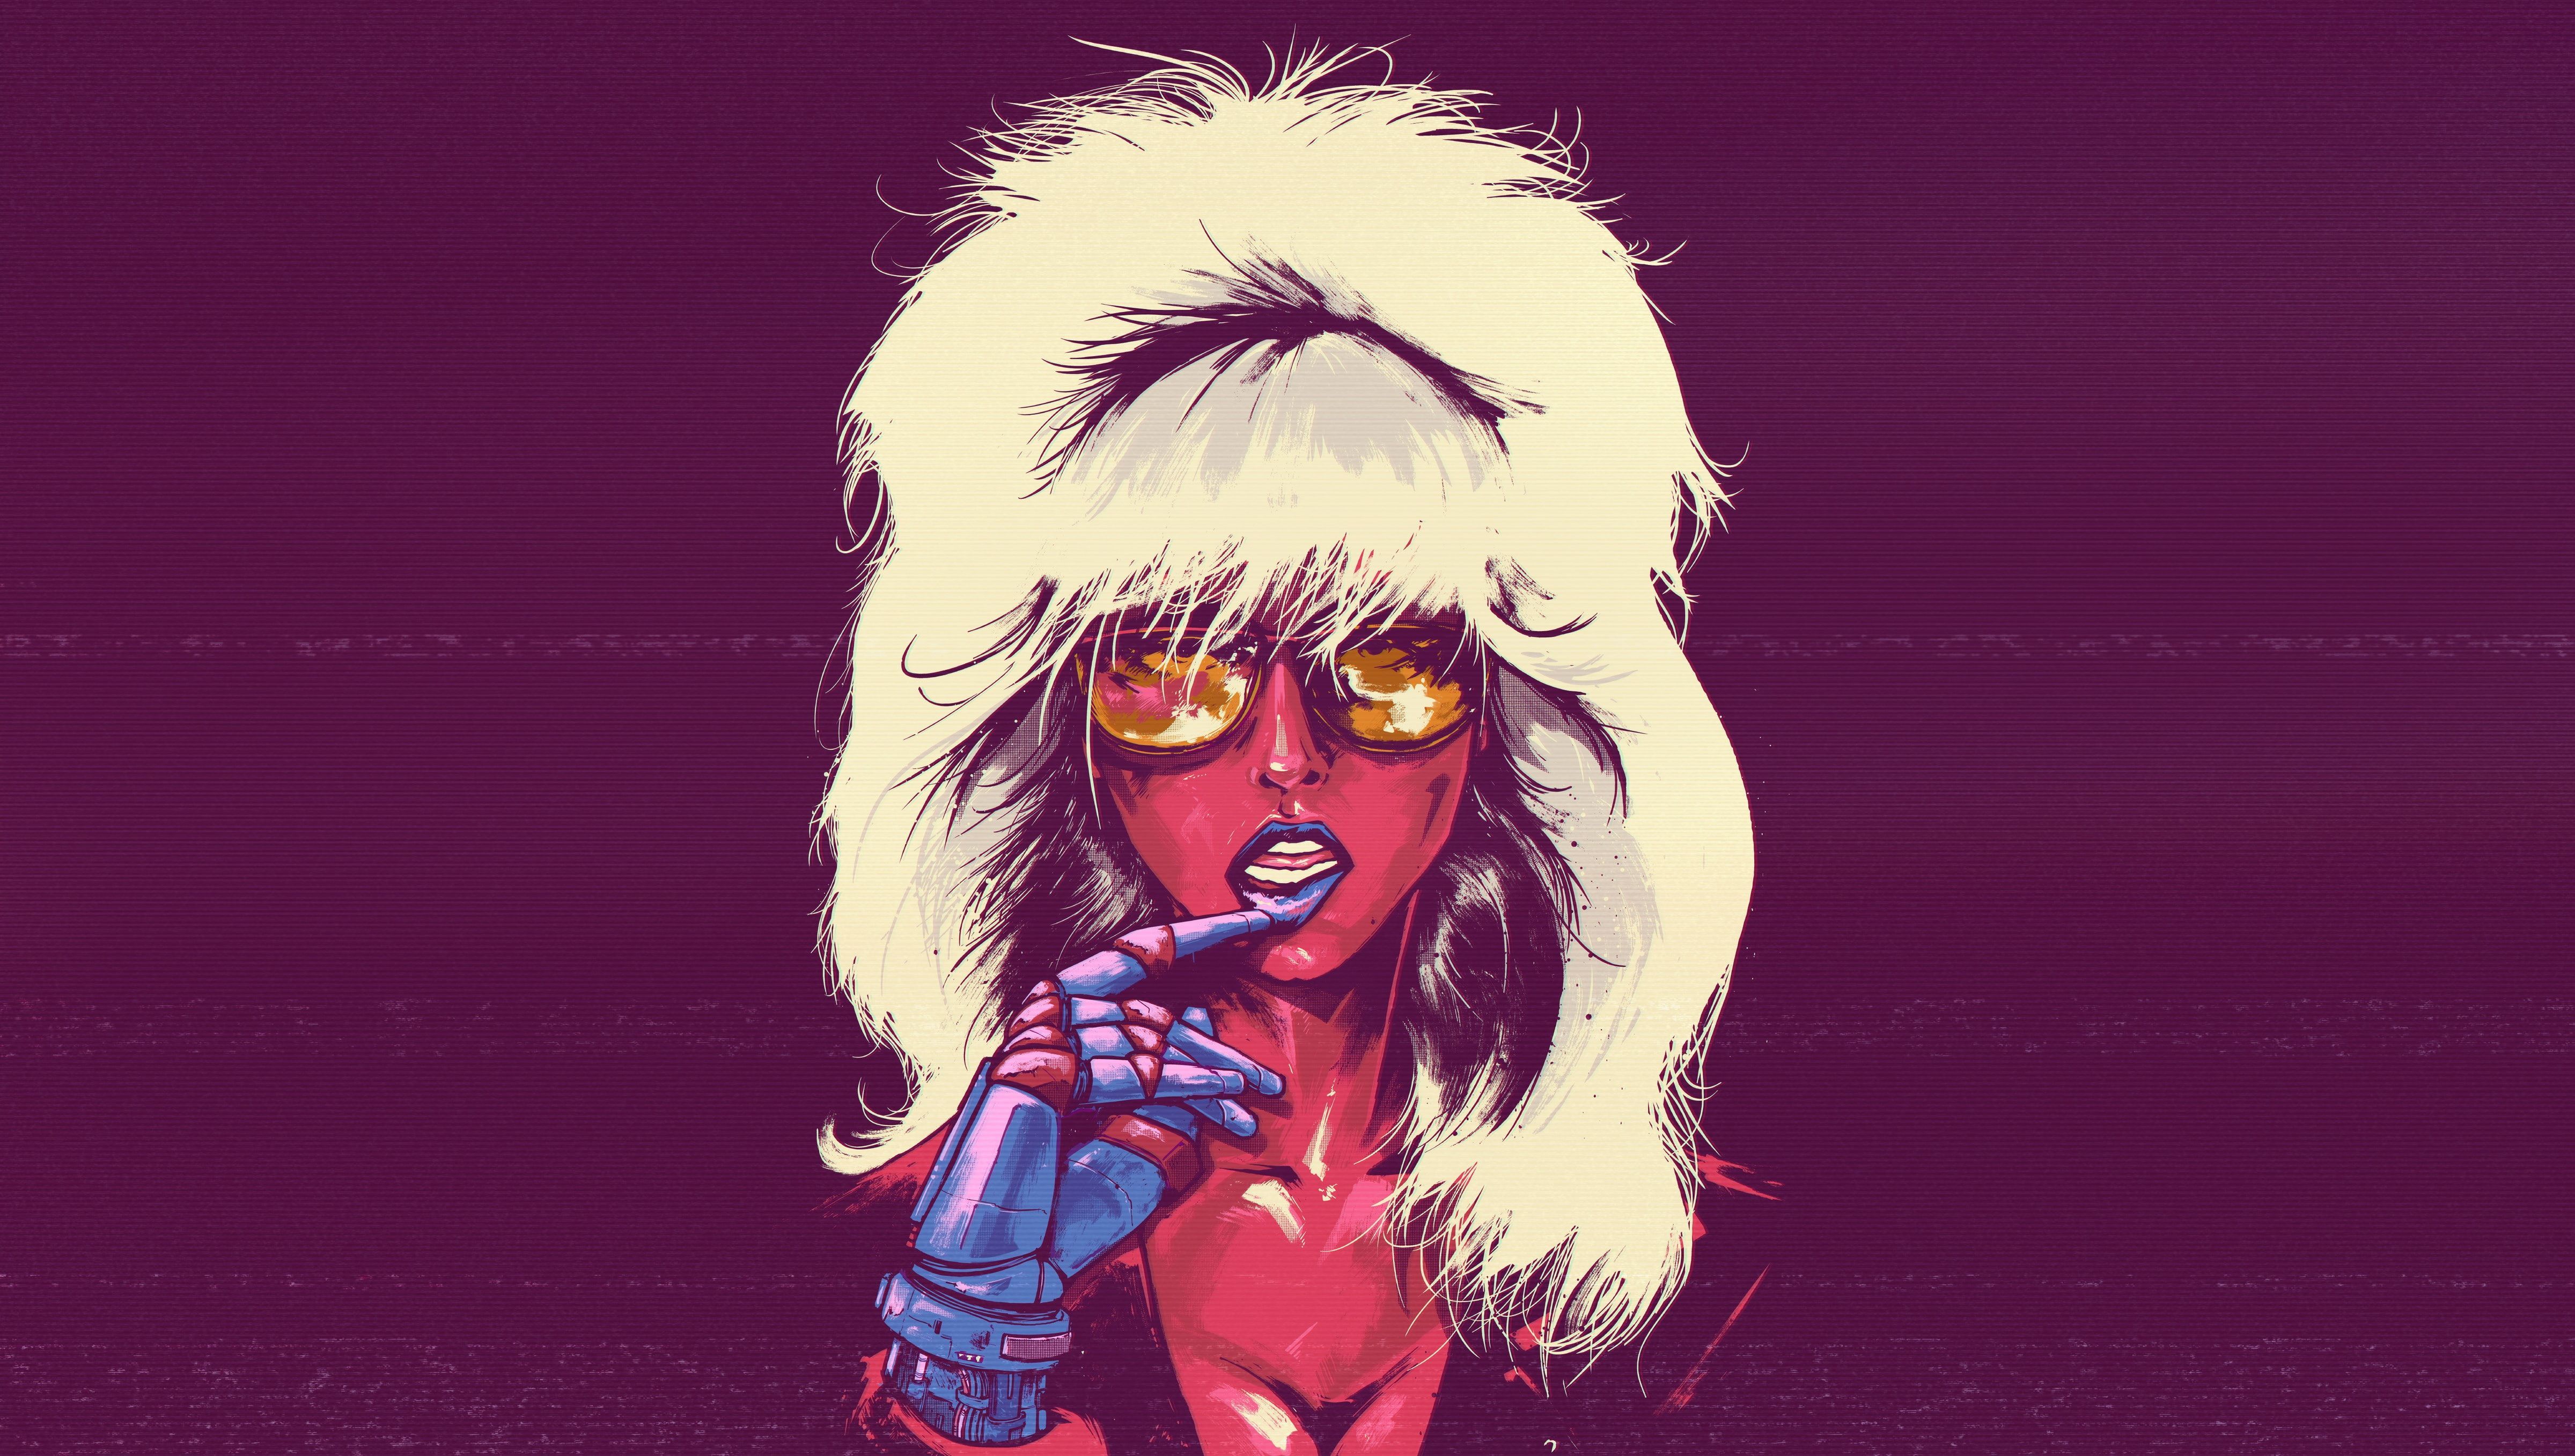 Girl #Minimalism #Music #Glasses #Style #Face s #Style #Illustration # 80's #Synth #Retrowave #Synthwave New Retro Wave #Futuresynth #Sintav #R. New retro wave